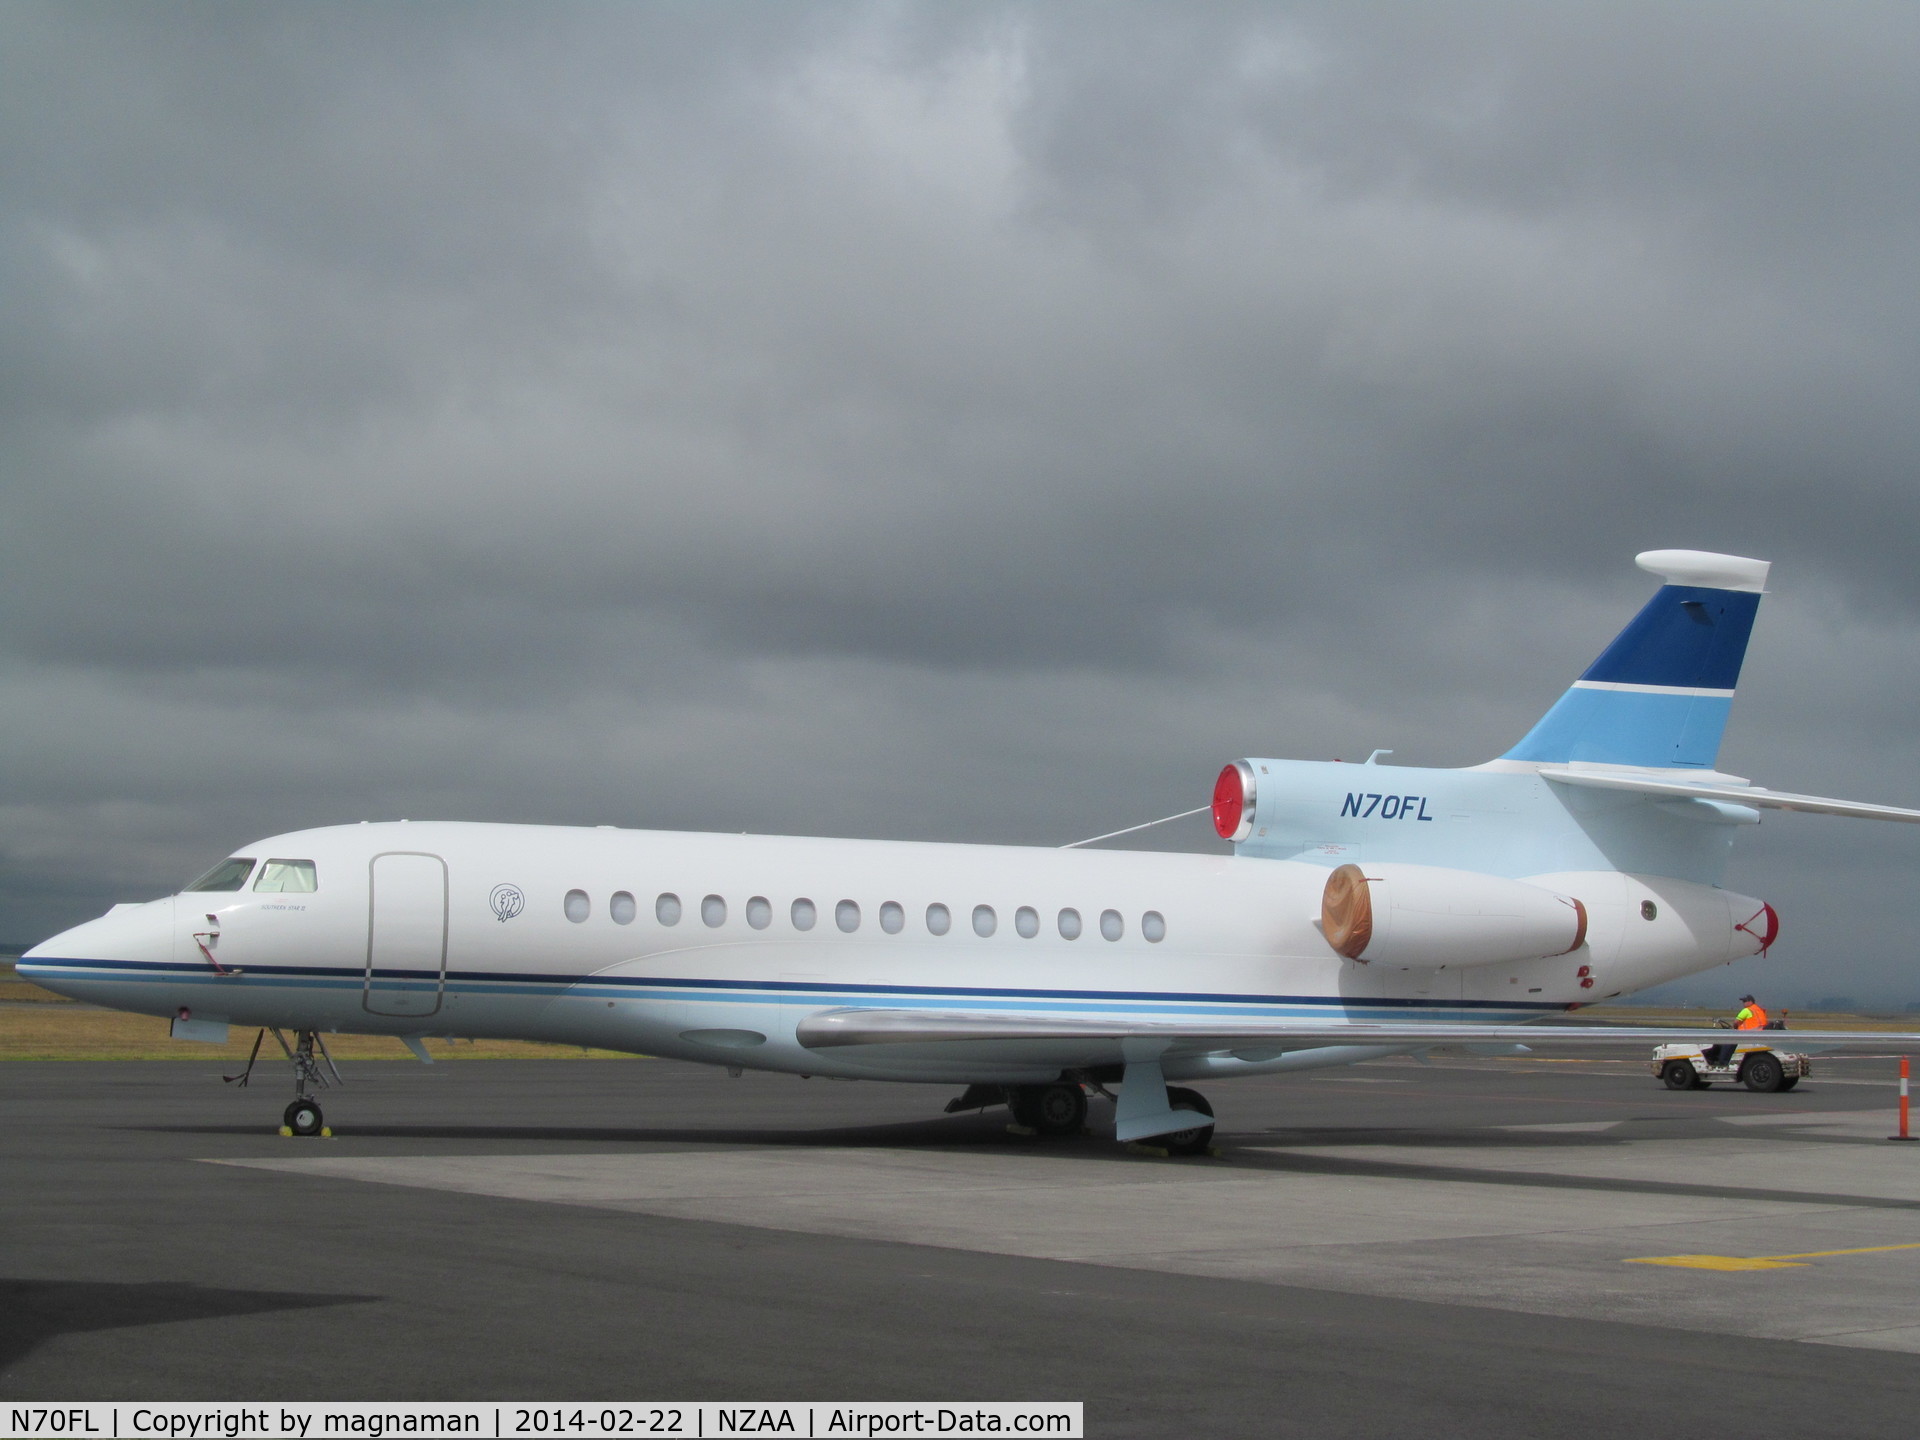 N70FL, 2007 Dassault Falcon 7X C/N 7, Argentine based falcon at AKL. Landed yesterday about 5pm